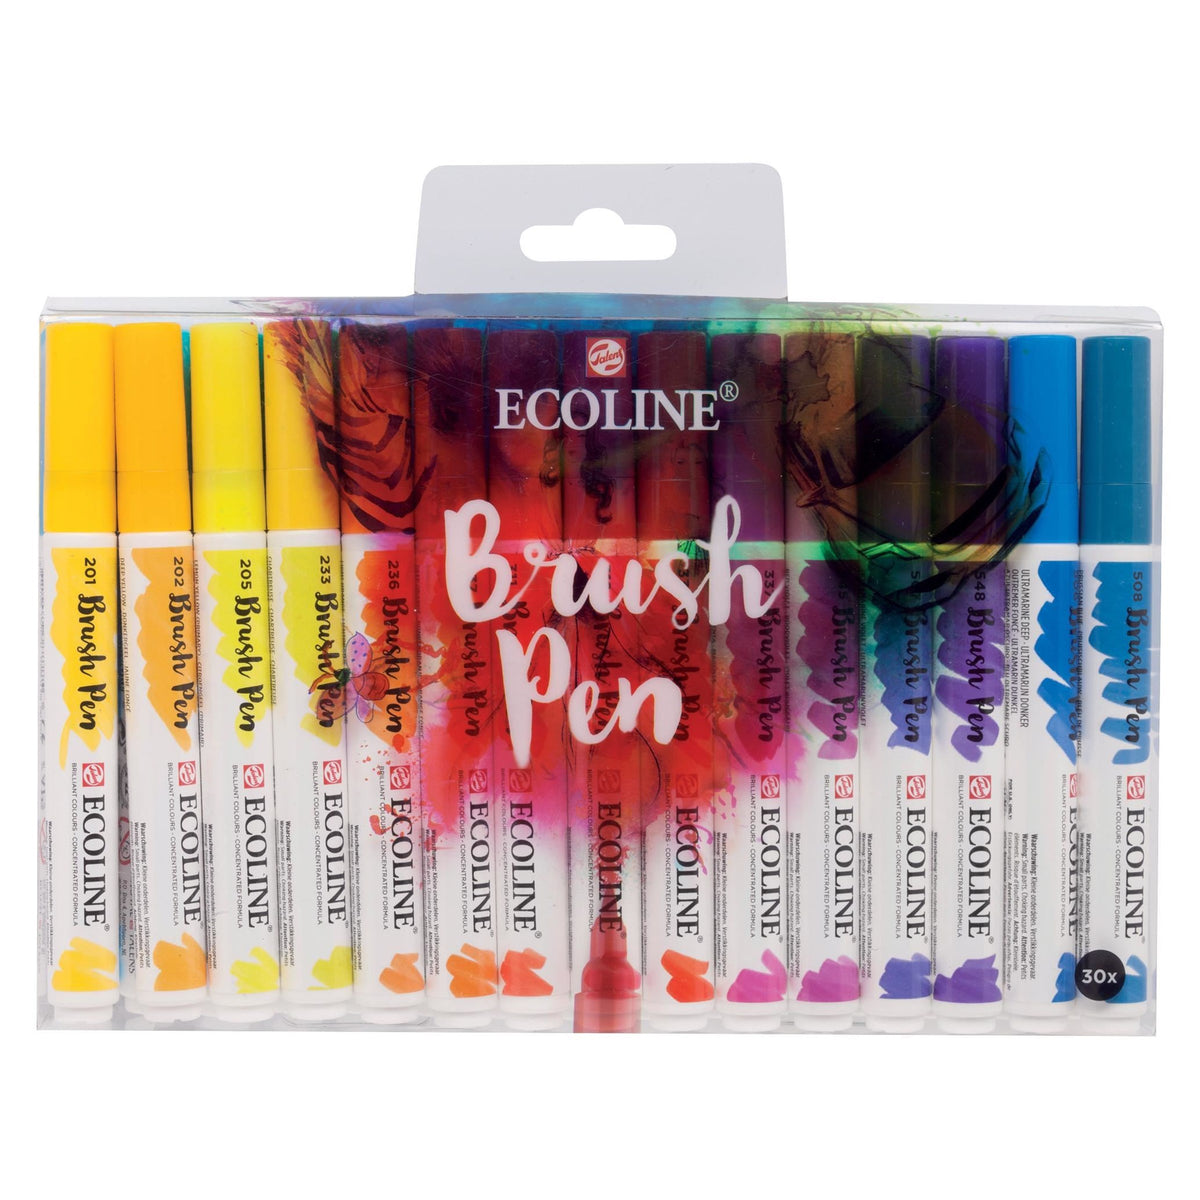 Brush Pen Review: Royal Talens Ecoline Brush Pens - The Well-Appointed Desk